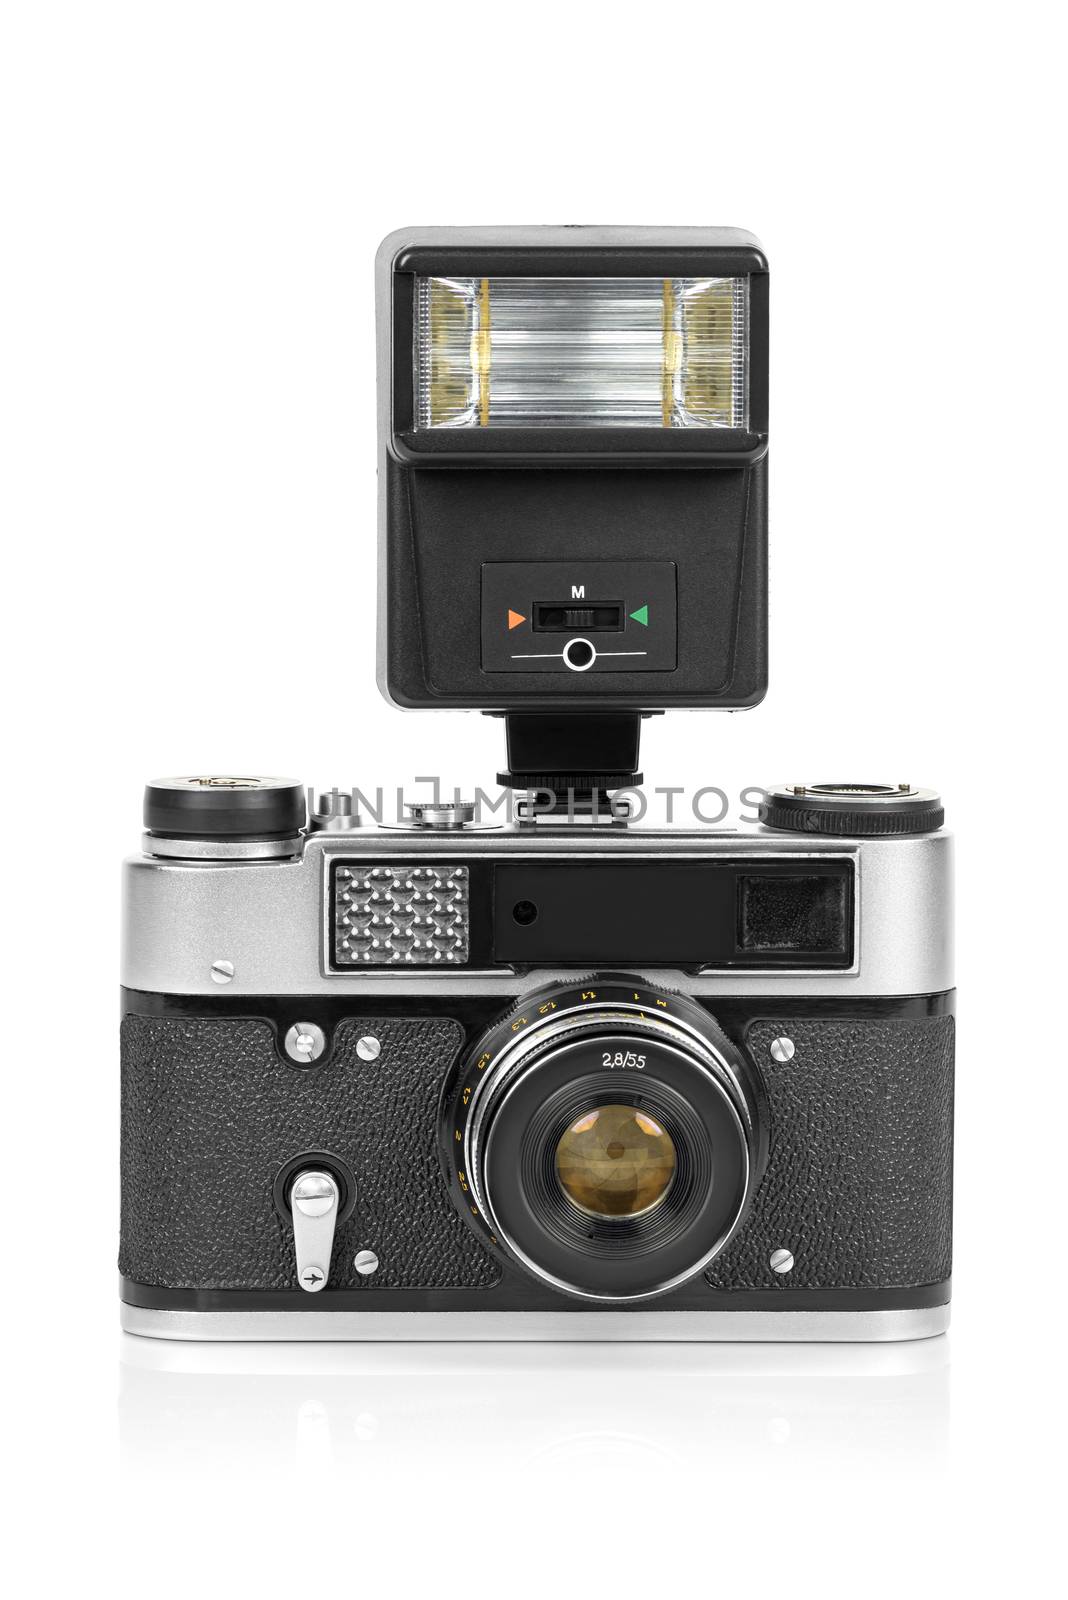 Vintage analog camera with manual flash light by mkos83